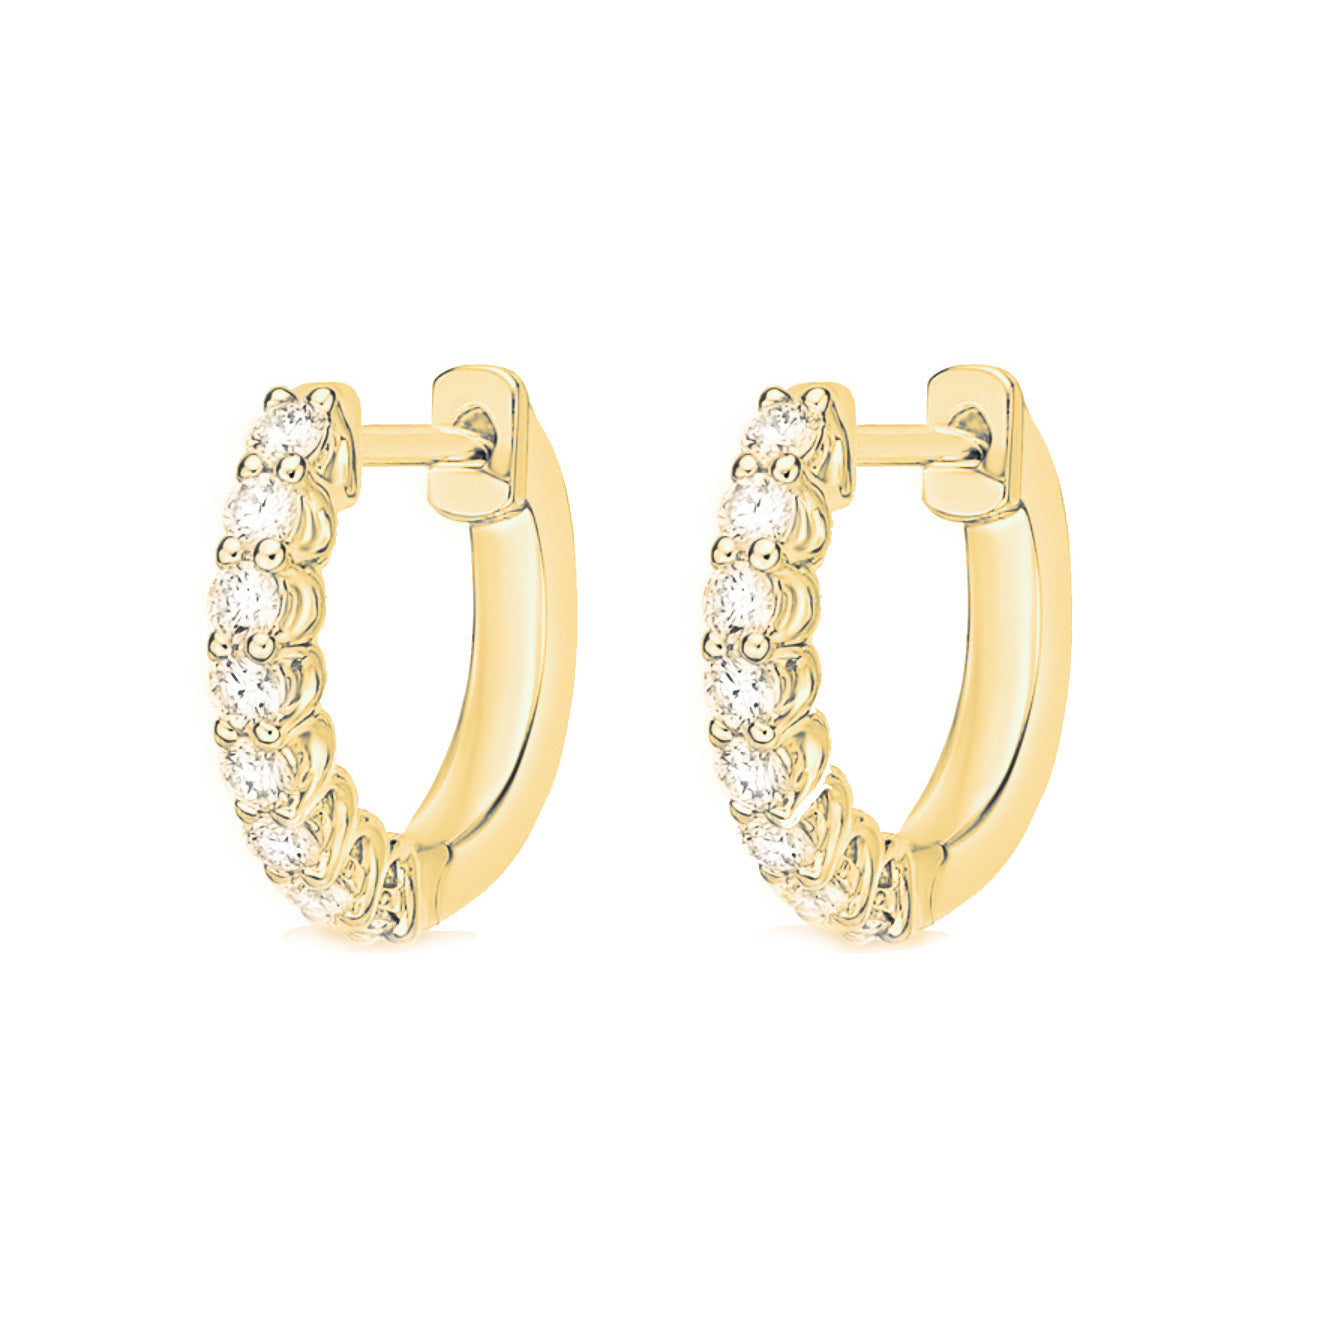 Round Brilliant Cut Diamond Huggie Hoops with Woven Gallery - 12mm - .25ctw